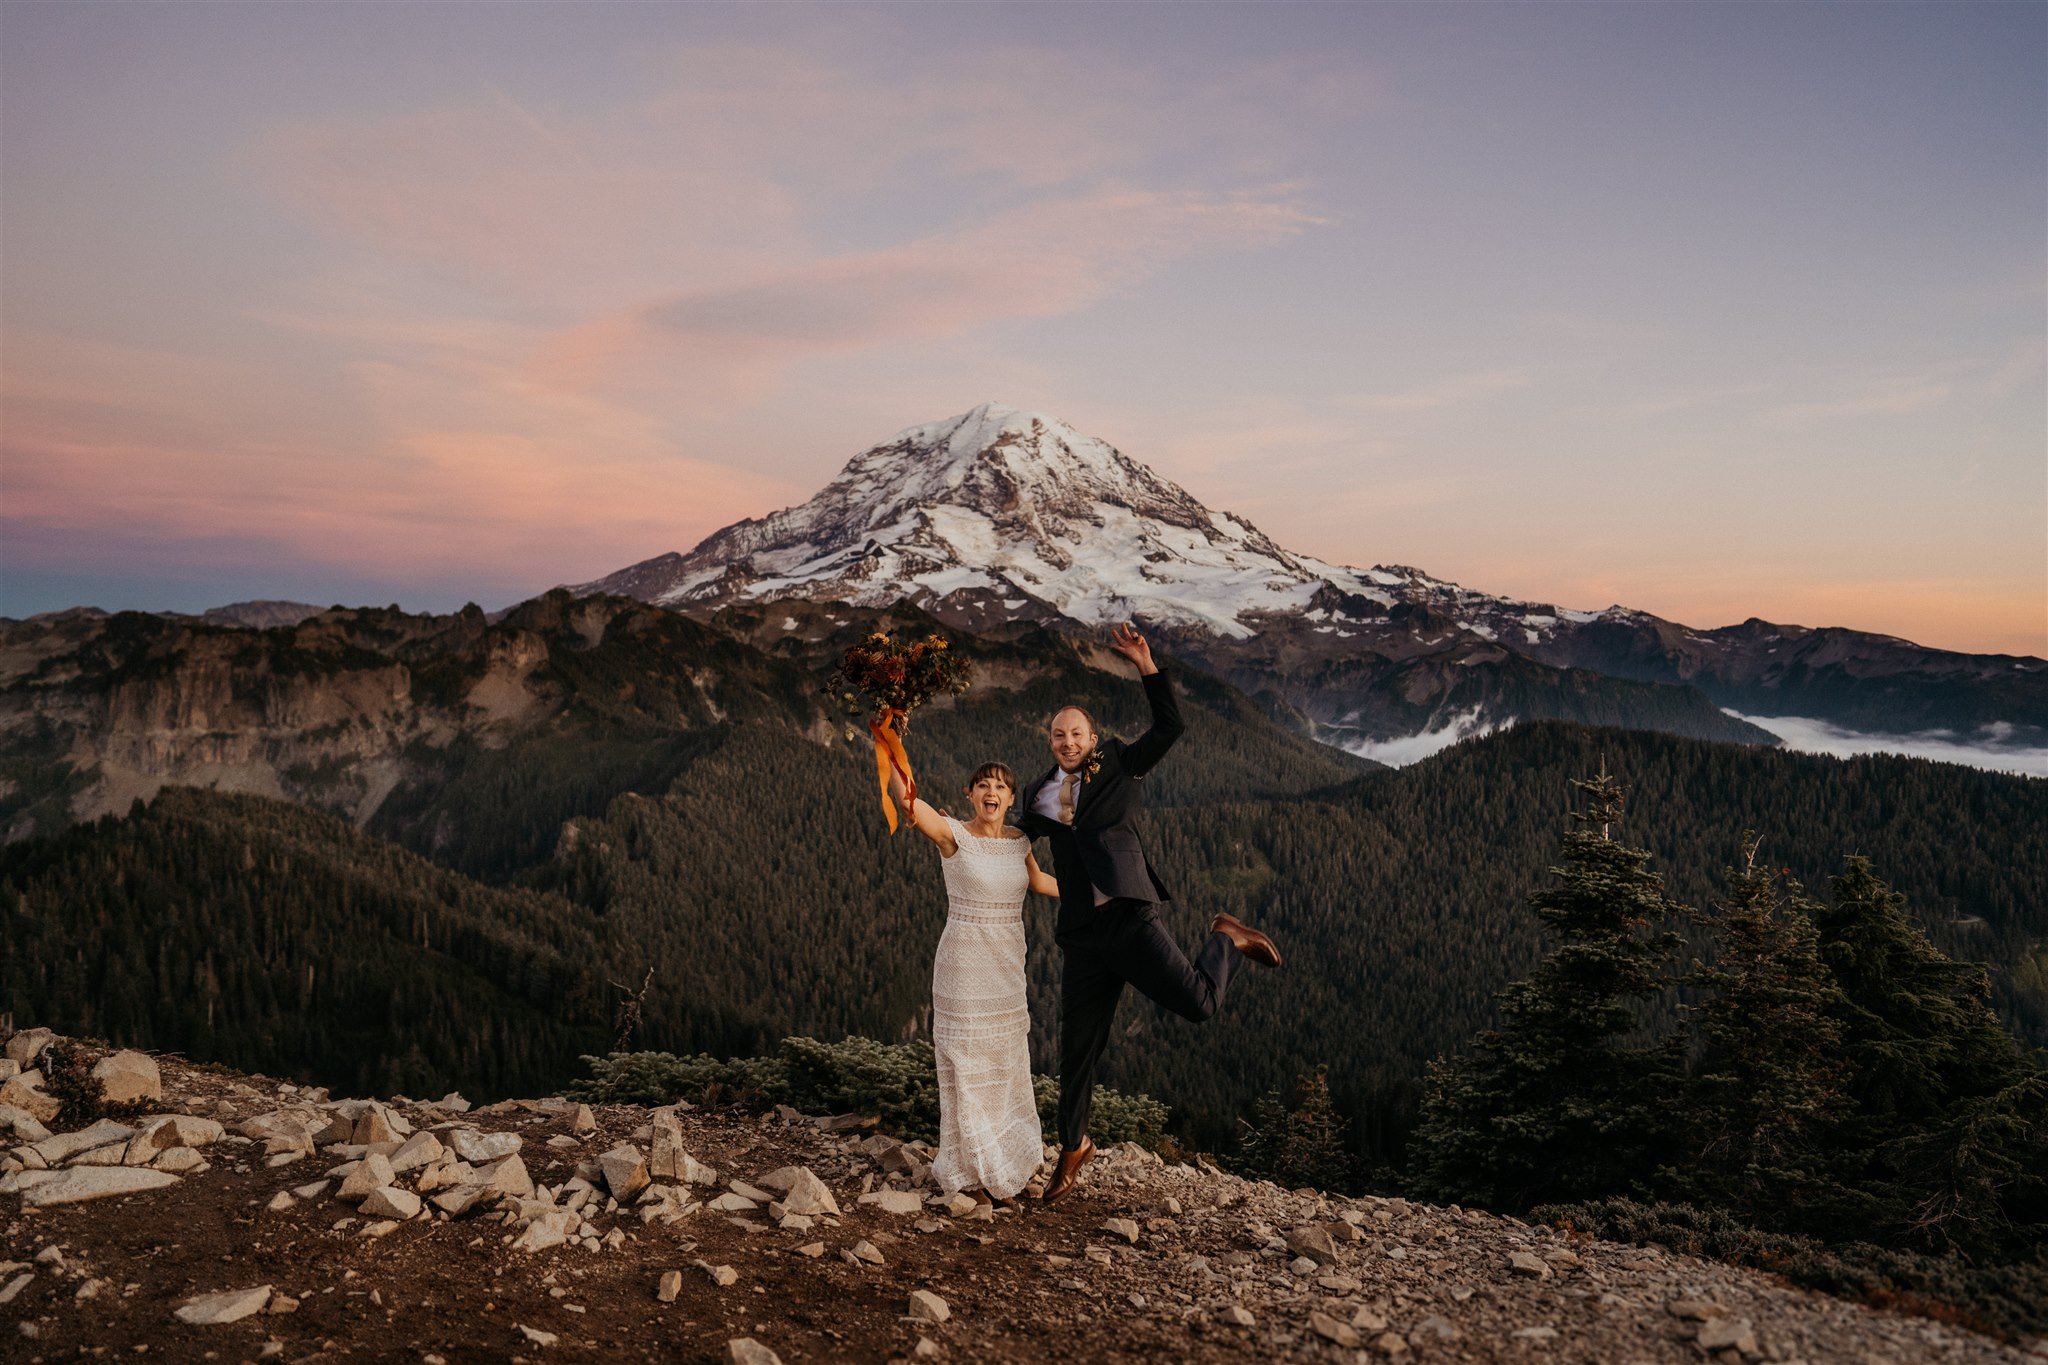 Bride and groom cheer and jump after autumn wedding ceremony at Mount Rainier National Park